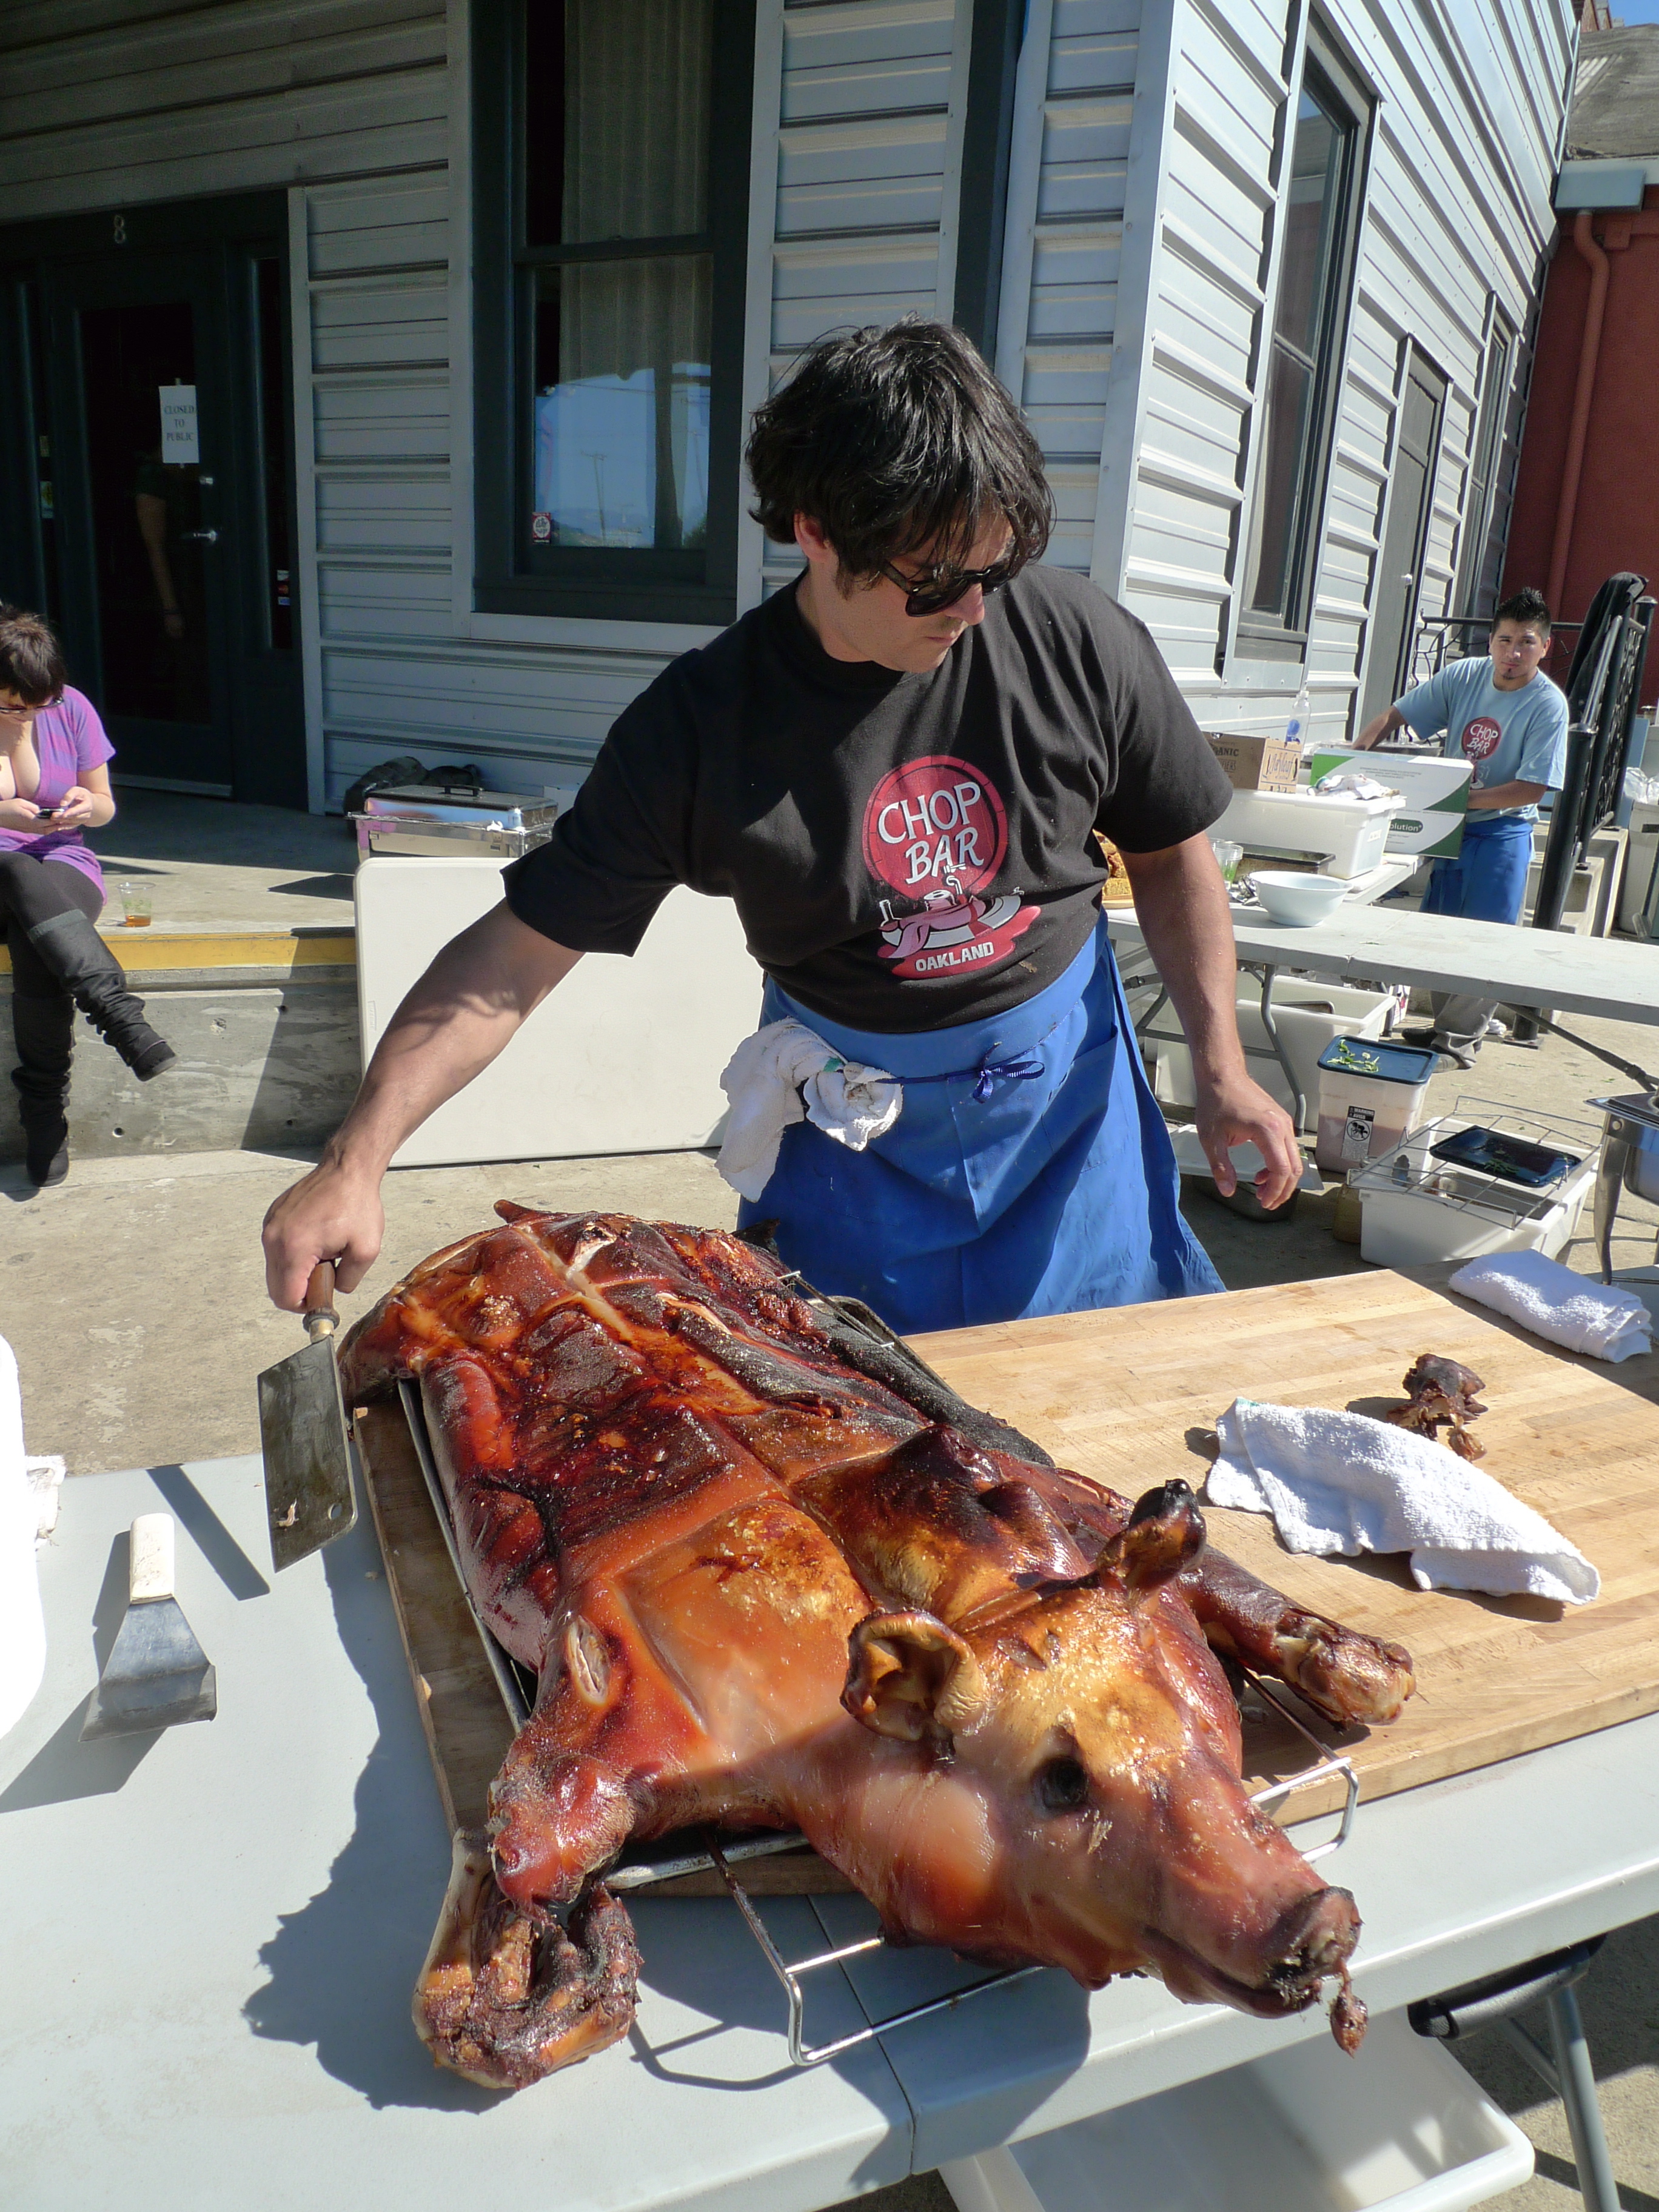 Getting Drunk on Swine at Chop Bar’s Pig Roast Party | Bay Area Bites | KQED Food2736 x 3648